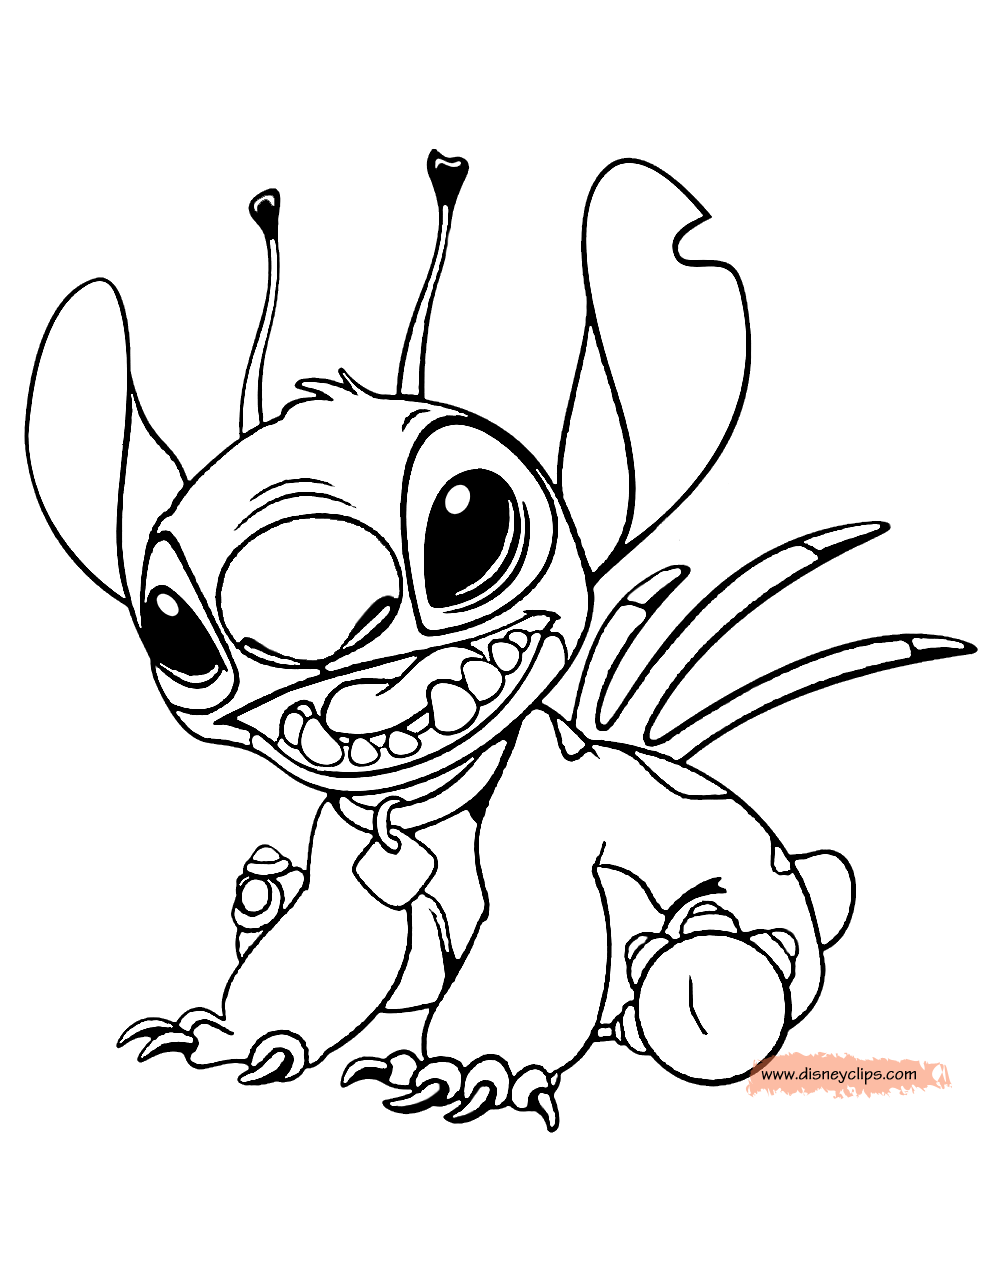 stitch-coloring-pages-to-download-and-print-for-free-stitch-coloring